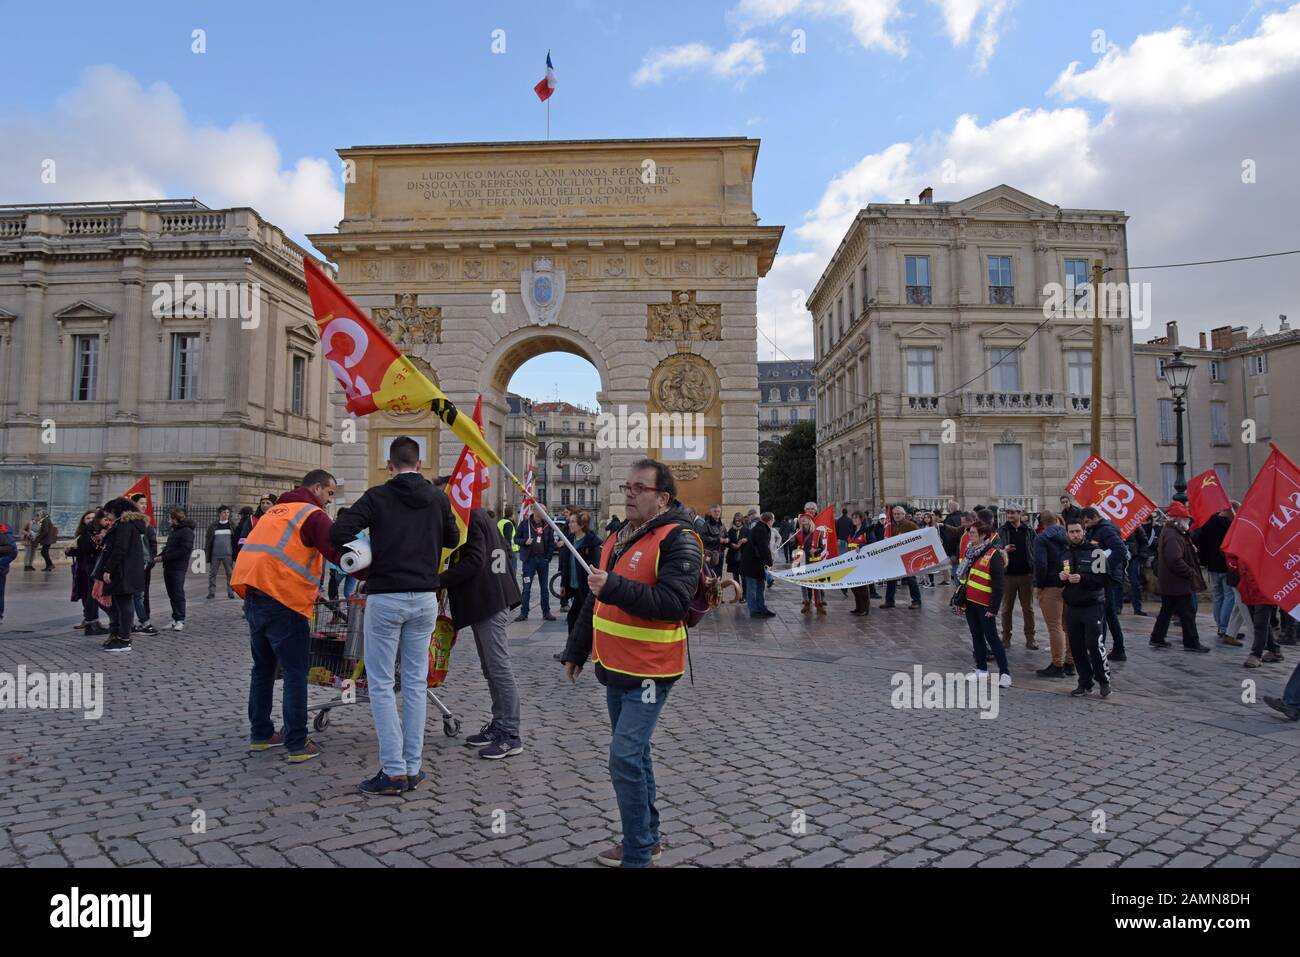 Montpellier, France. 14th January 2020. A large march and demonstration against President Macron's planned pension reform takes place through the city centre. Hundreds of protestors took to the streets, including teachers, telecoms workers and lawyers.  G.P Essex/Alamy Live News Stock Photo